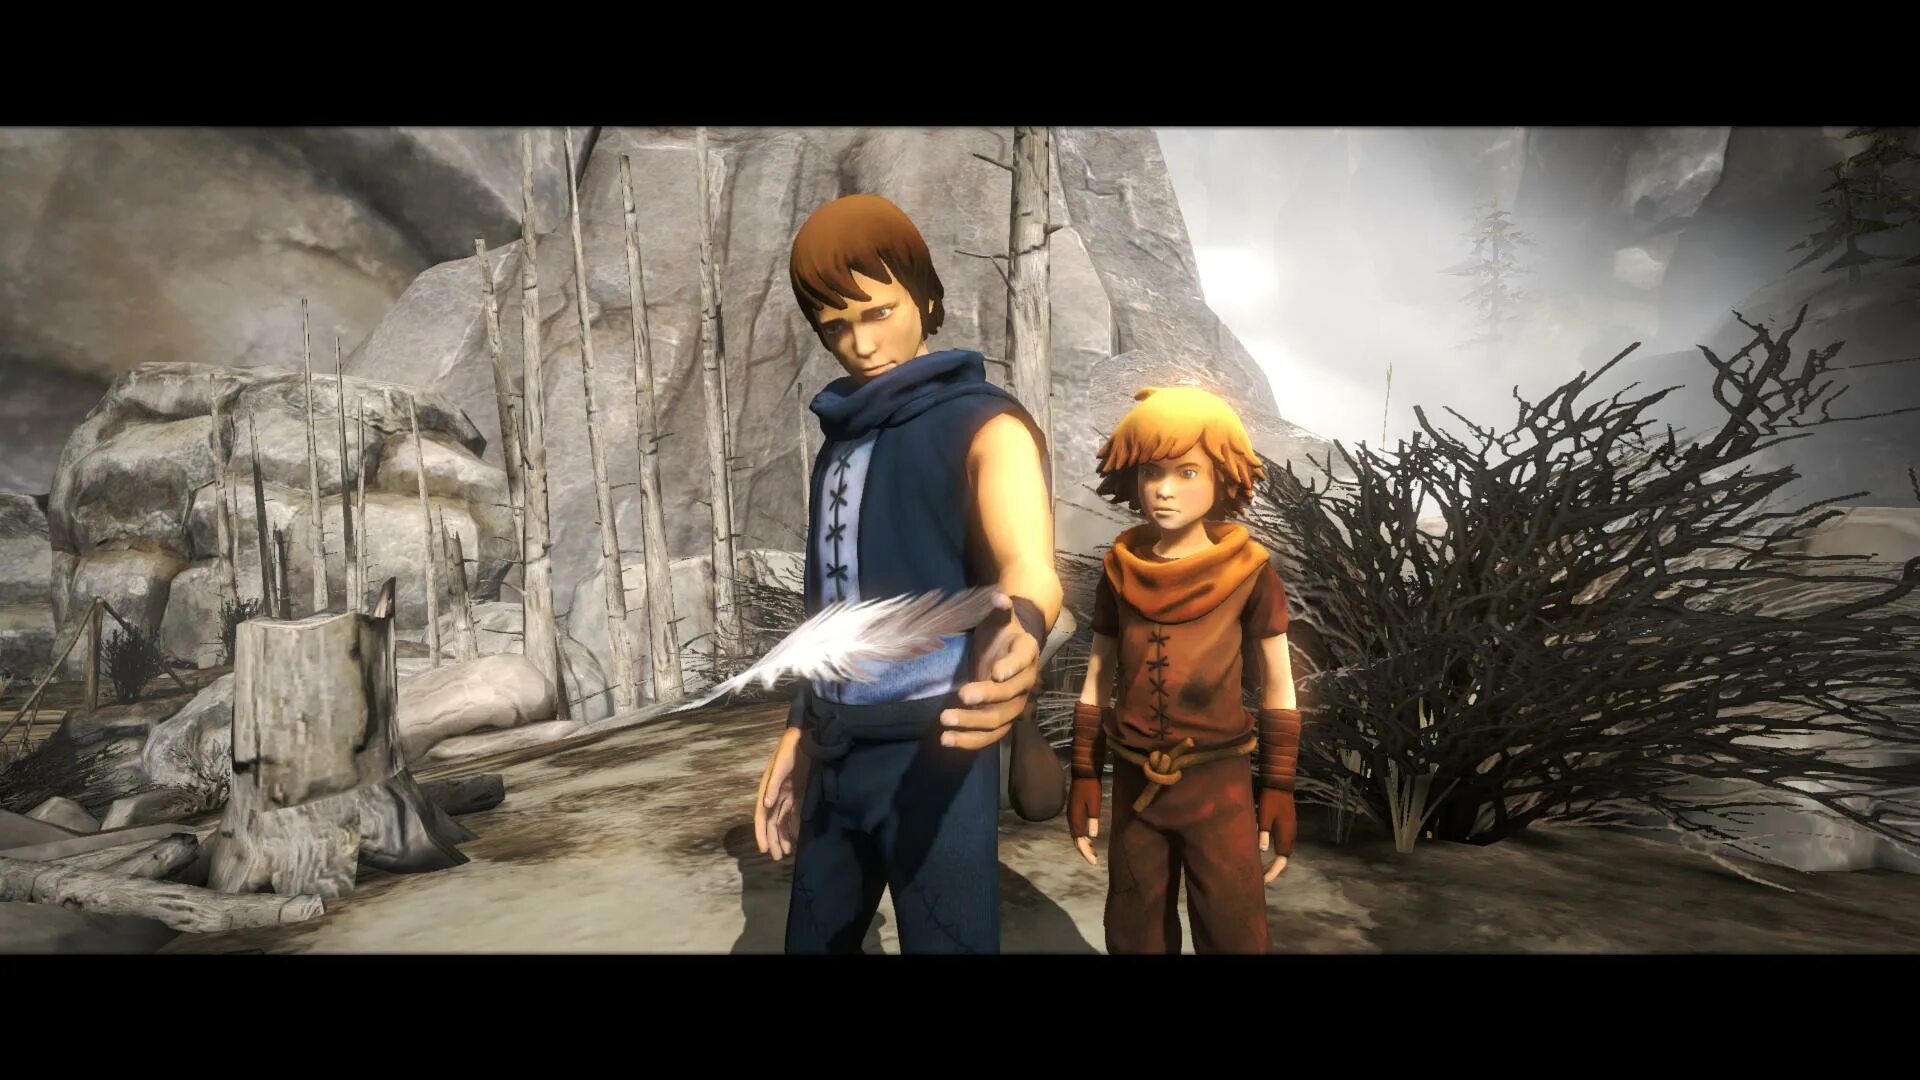 2 brothers game. Brothers: a Tale of two sons. Two brothers игра. Brothers two Souls. Игра про двух братьев.